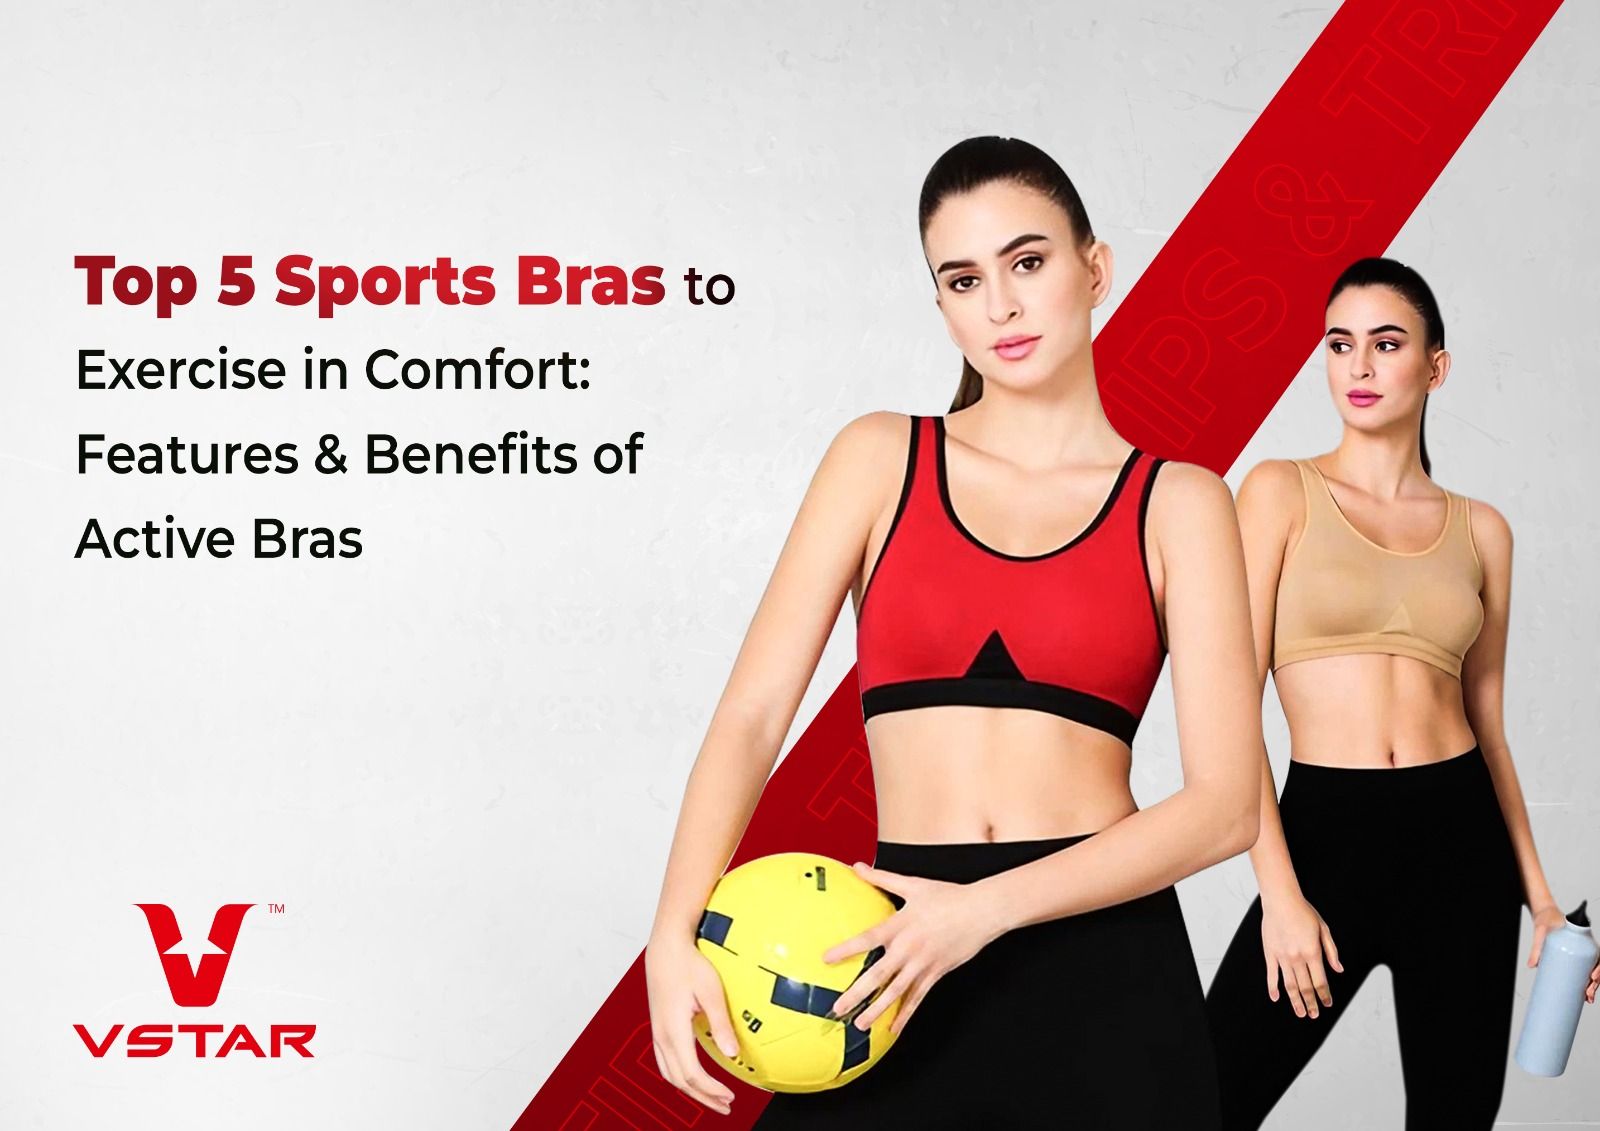 How To Choose The Best Sports Bra For Every Type of Exercise